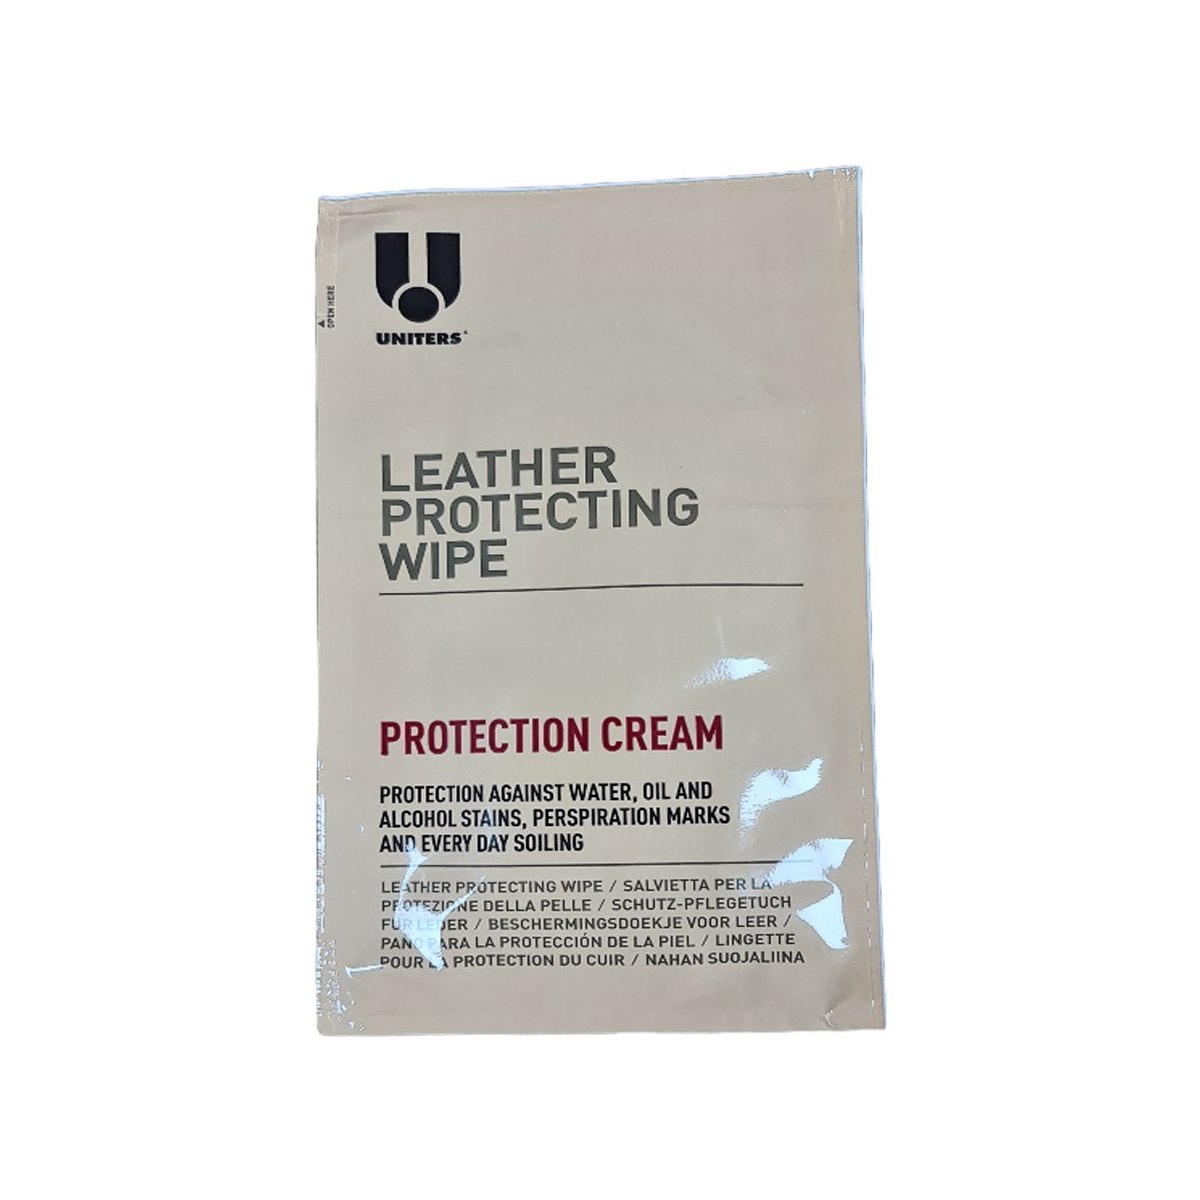 Uniters Leather Protection Cream Protecting Wipe